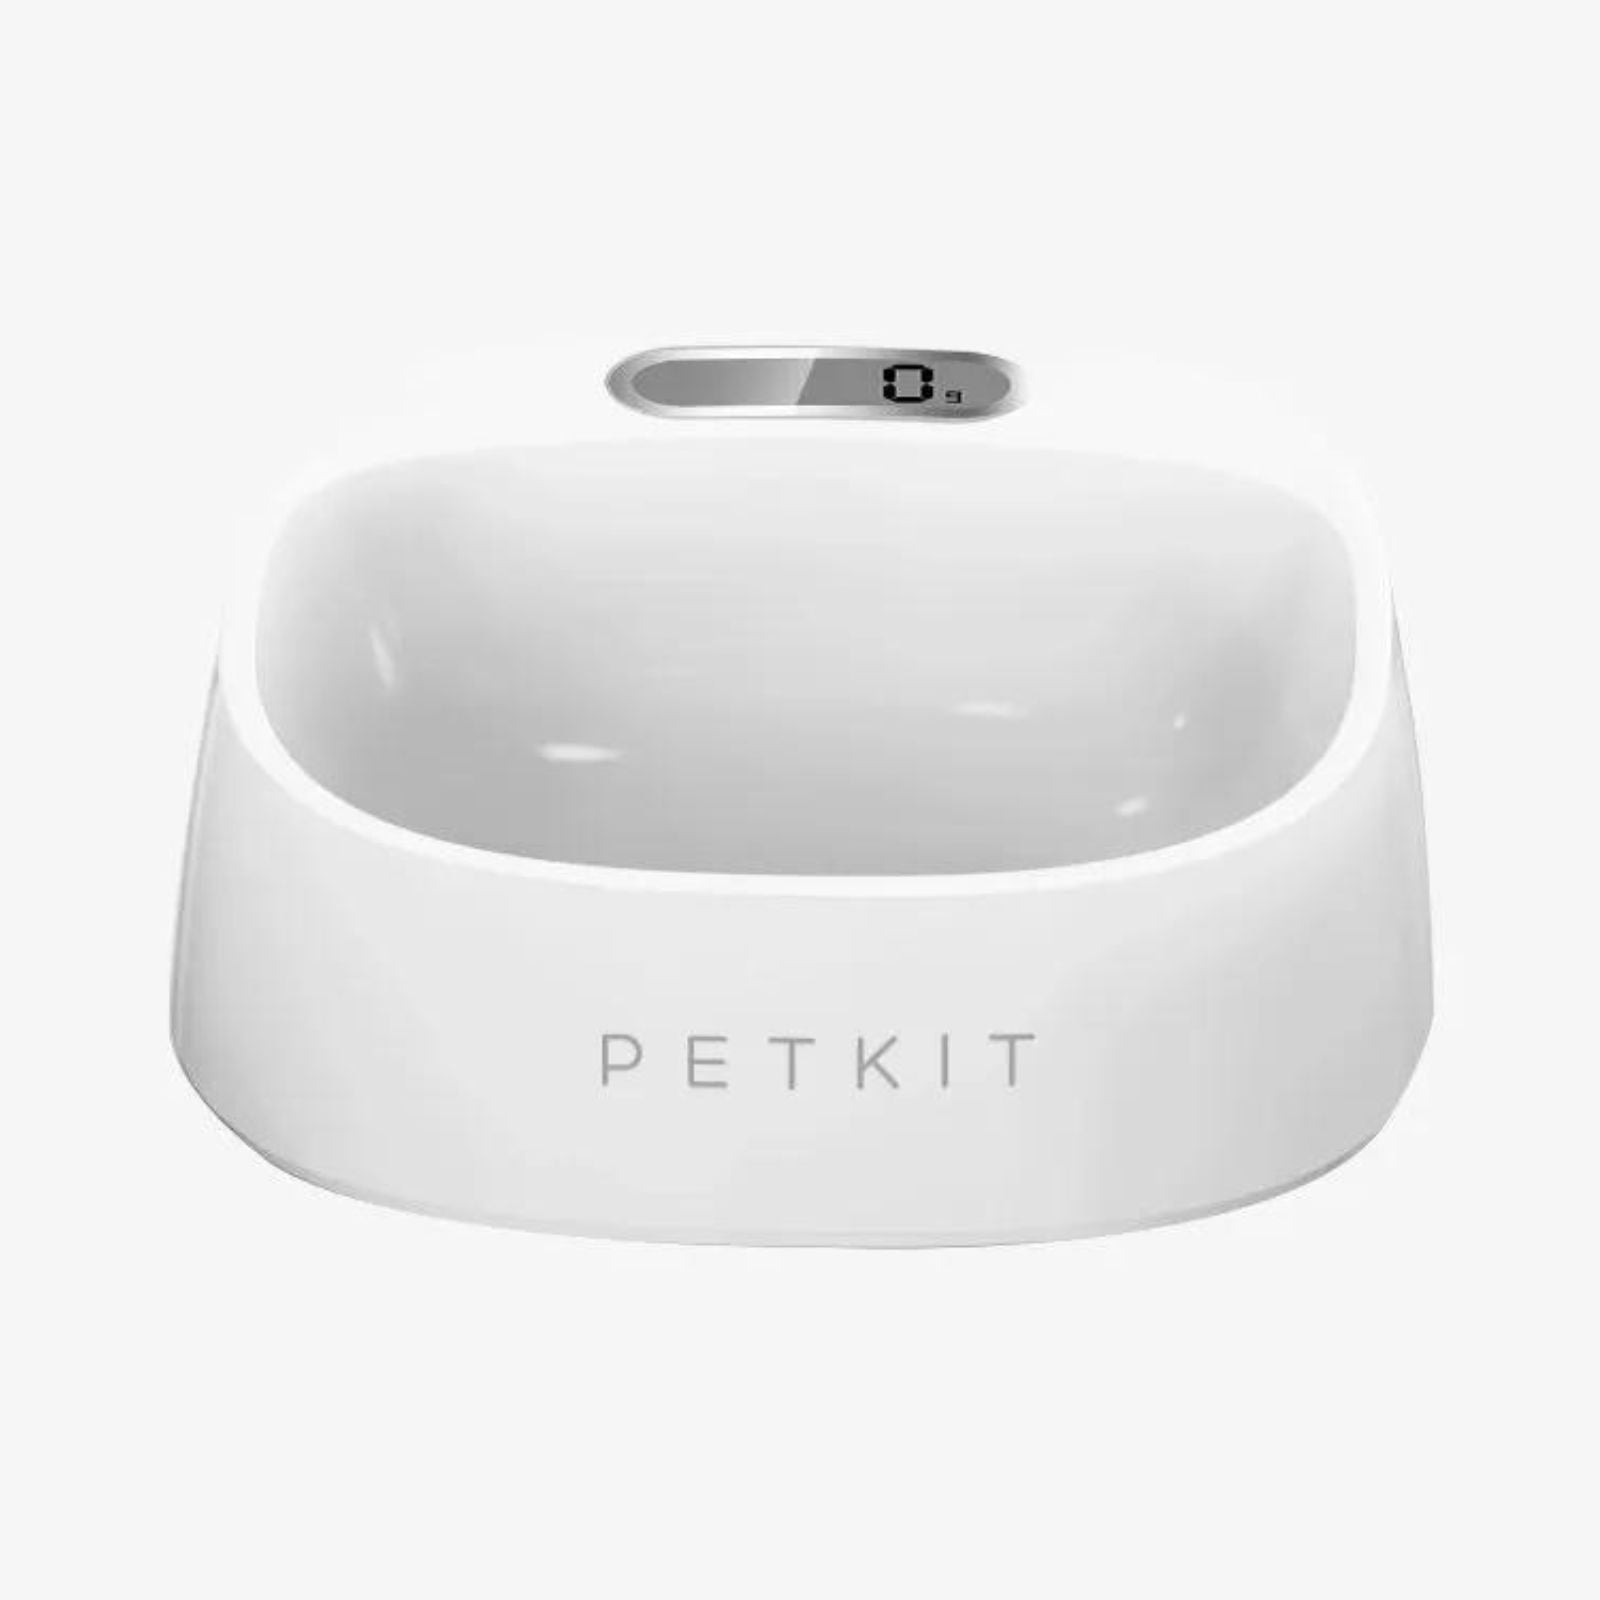 PETKIT high-tech pet bowl features a built-in digital scale, and anti-bacterial materials.